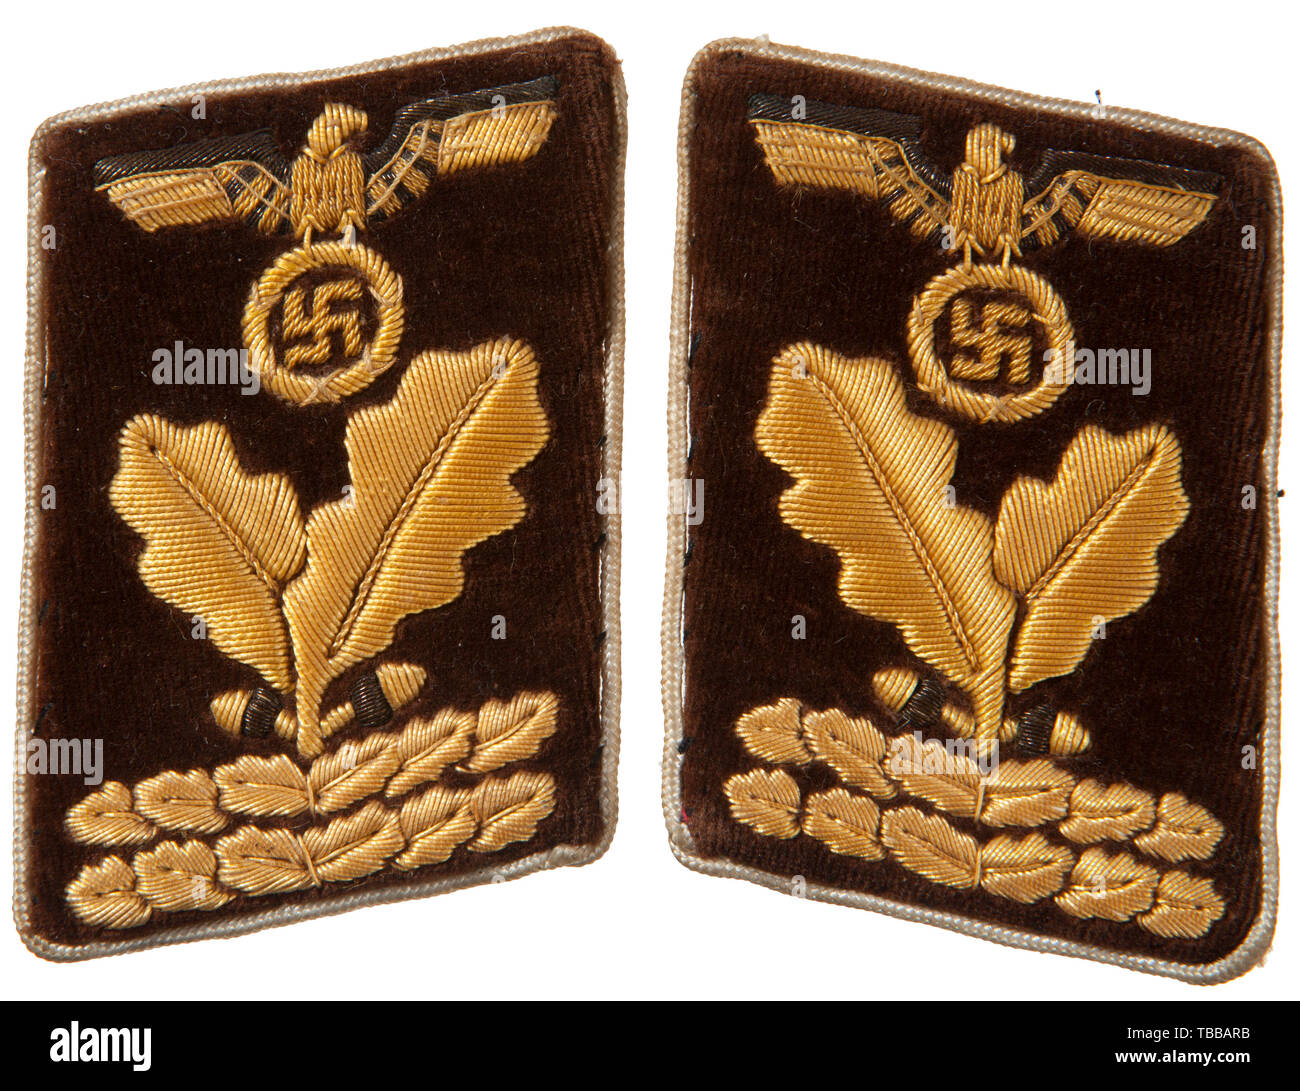 THE JOHN PEPERA COLLECTION, A Pair of Collar Tabs for NSDAP Kreisleitung Hauptbereichsleiter, Light brown velvet on buckram backing, outer edges trimmed in white rayon piping with paper RZM tag. Tabs feature cellon embroidered national eagle above two oak leaves above two horizontal oak leaf bars in matching construction all with gold wire thread highlights., Editorial-Use-Only Stock Photo